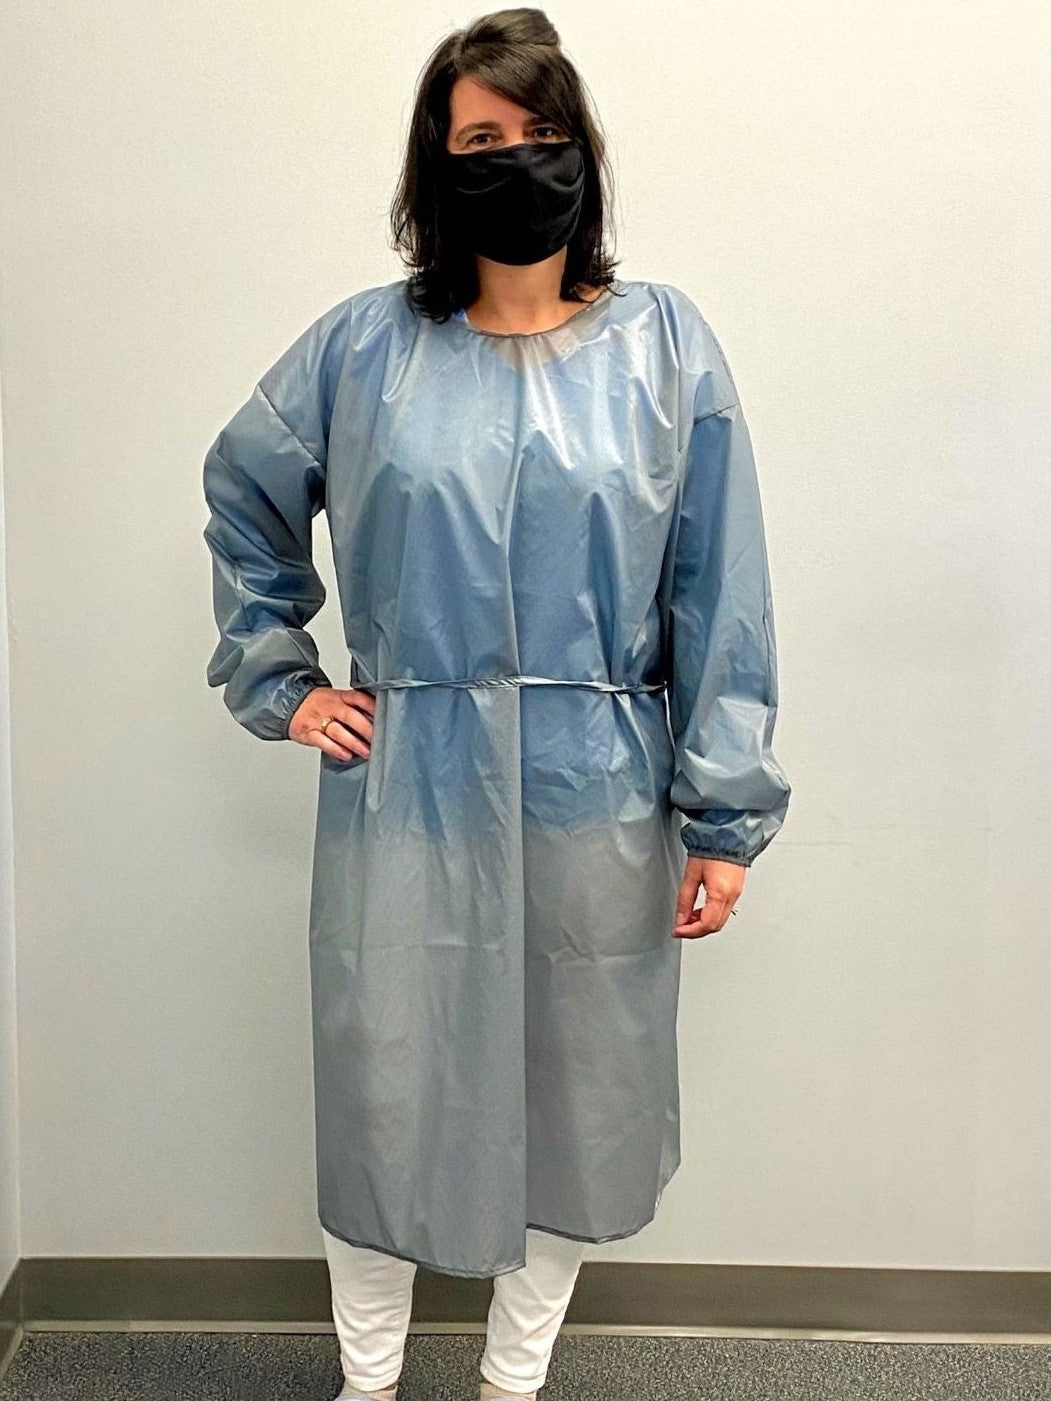 Custom Anti-Statics Polyester Reusable Surgical Gowns  Manufacturers,Suppliers,Factory - Tecbodmed.com